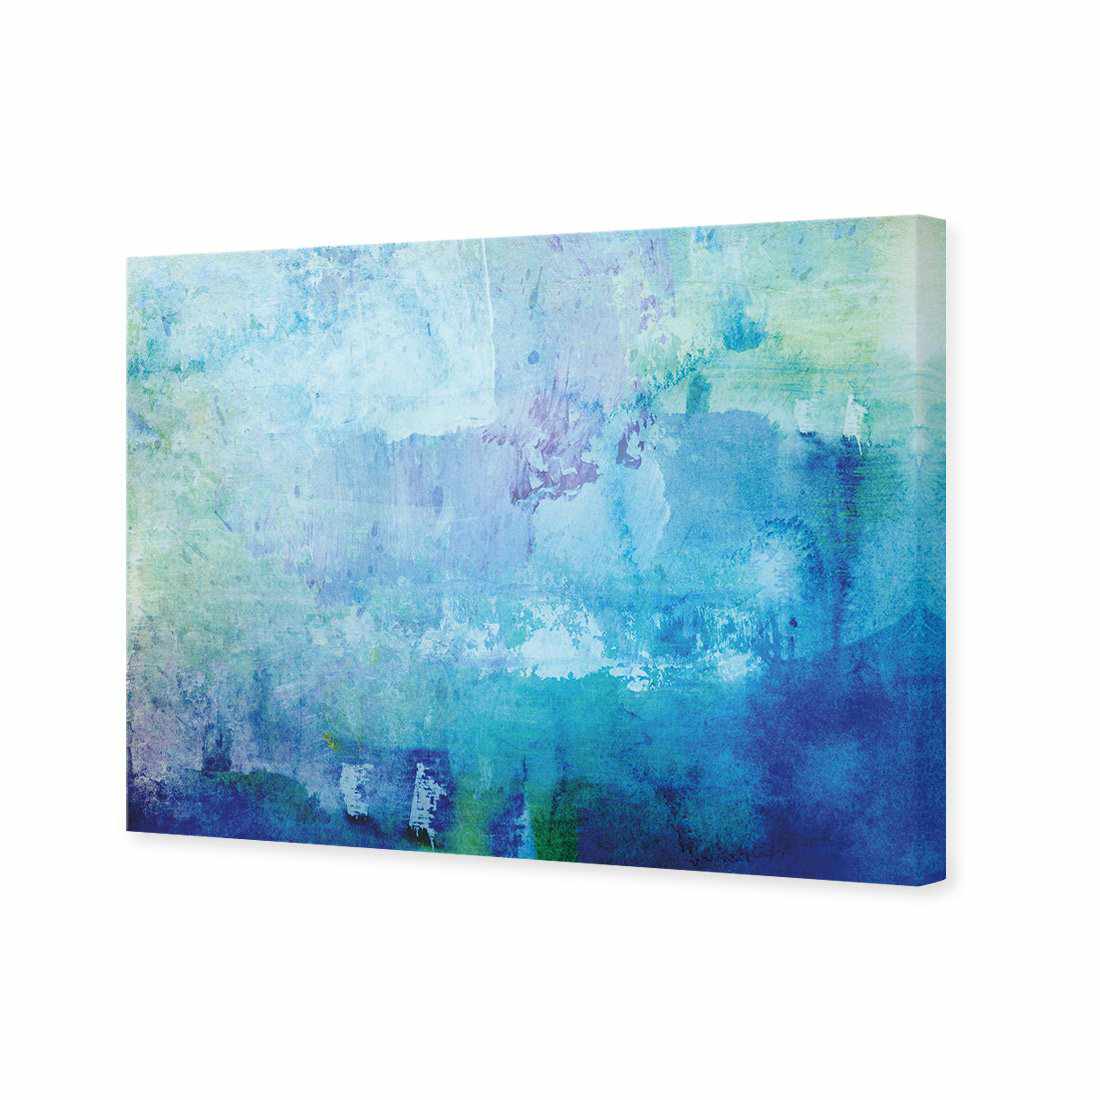 Structurally Sound Canvas Art exclusive at Wall Art Designs